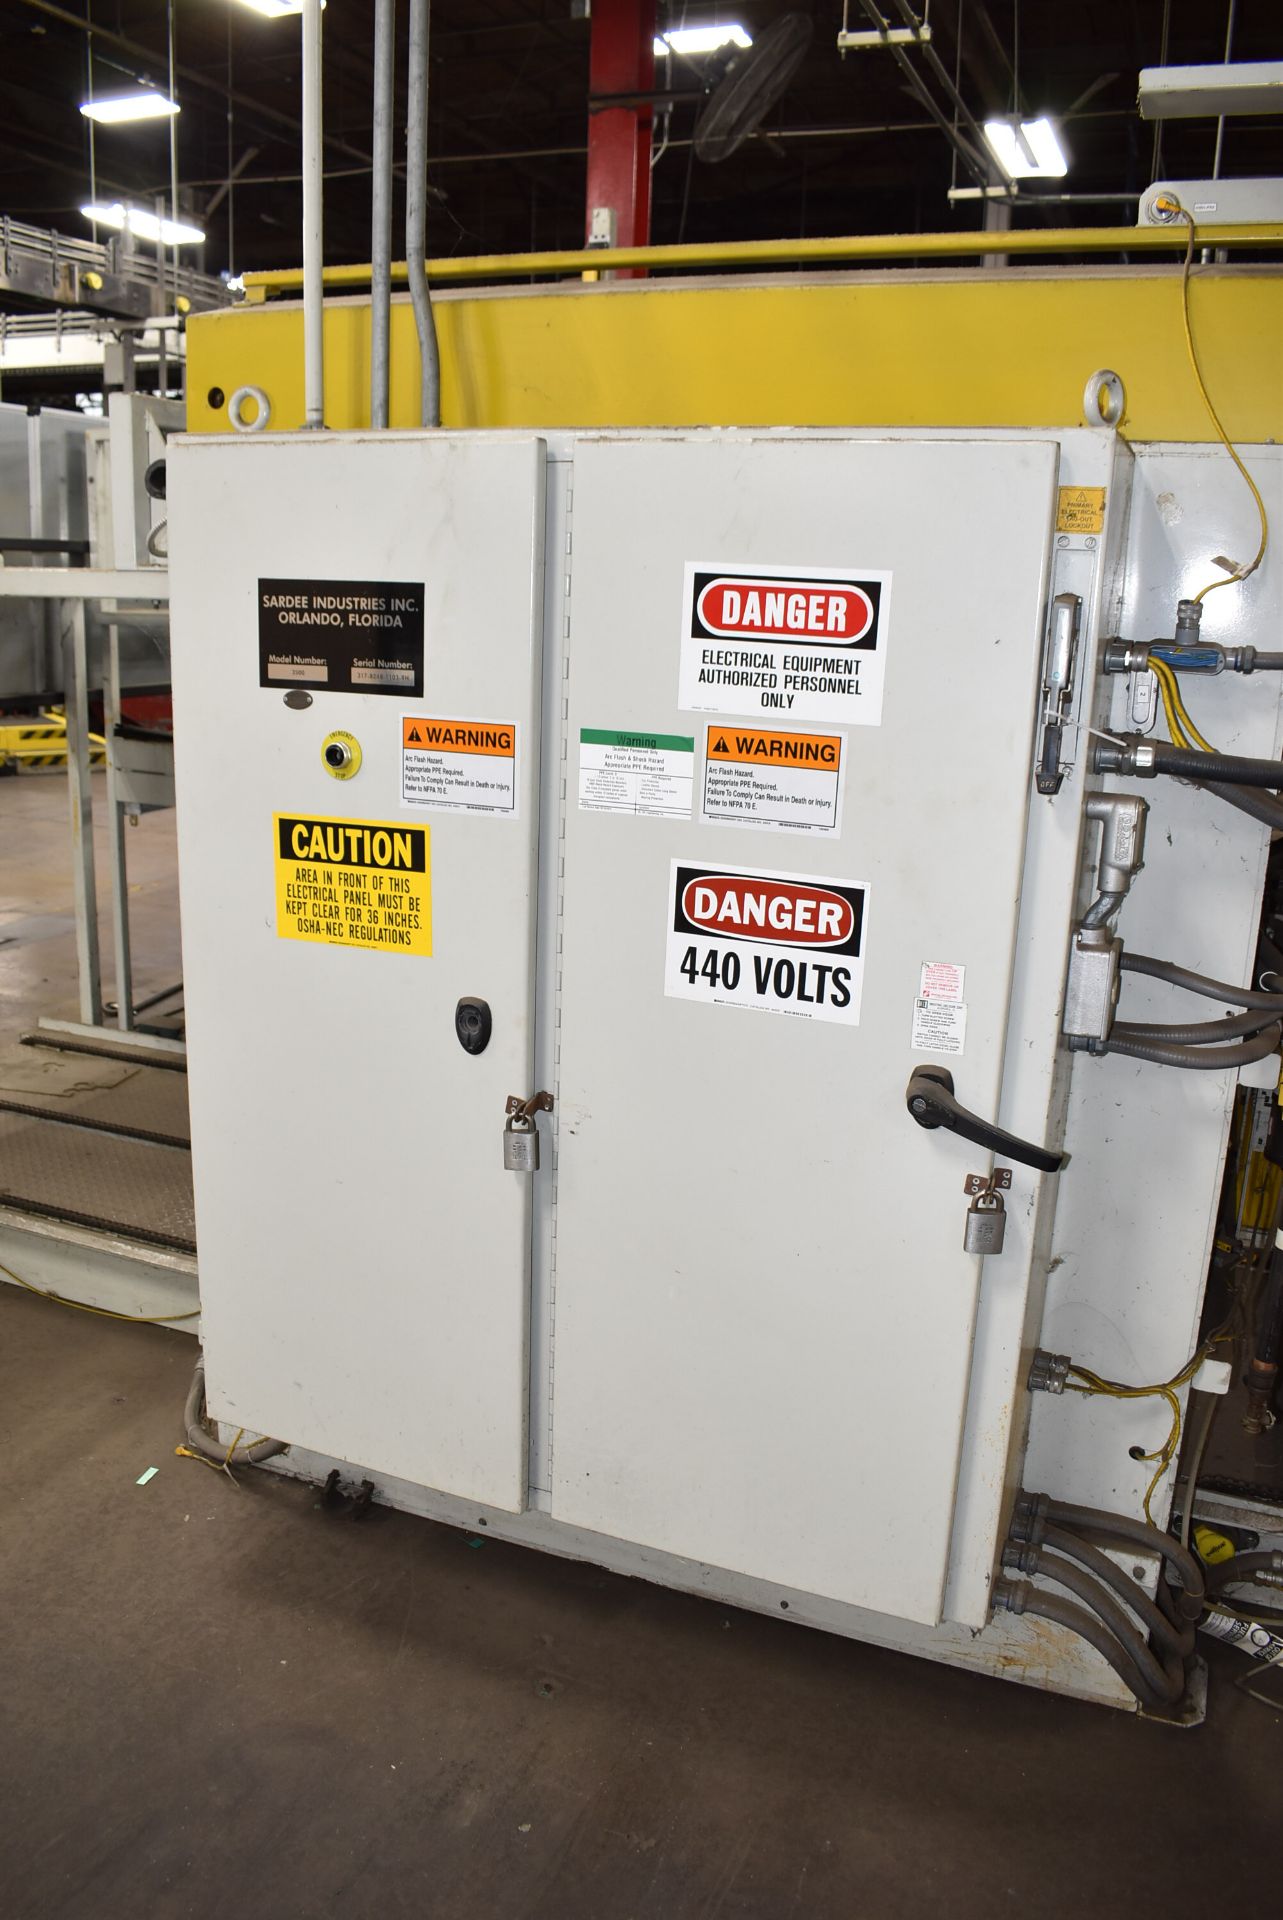 SARDEE INDUSTRIES 3500 PALLETIZER WITH ALLEN BRADLEY PANEL VIEW 600 TOUCH SCREEN CONTROL, BANNER - Image 20 of 27